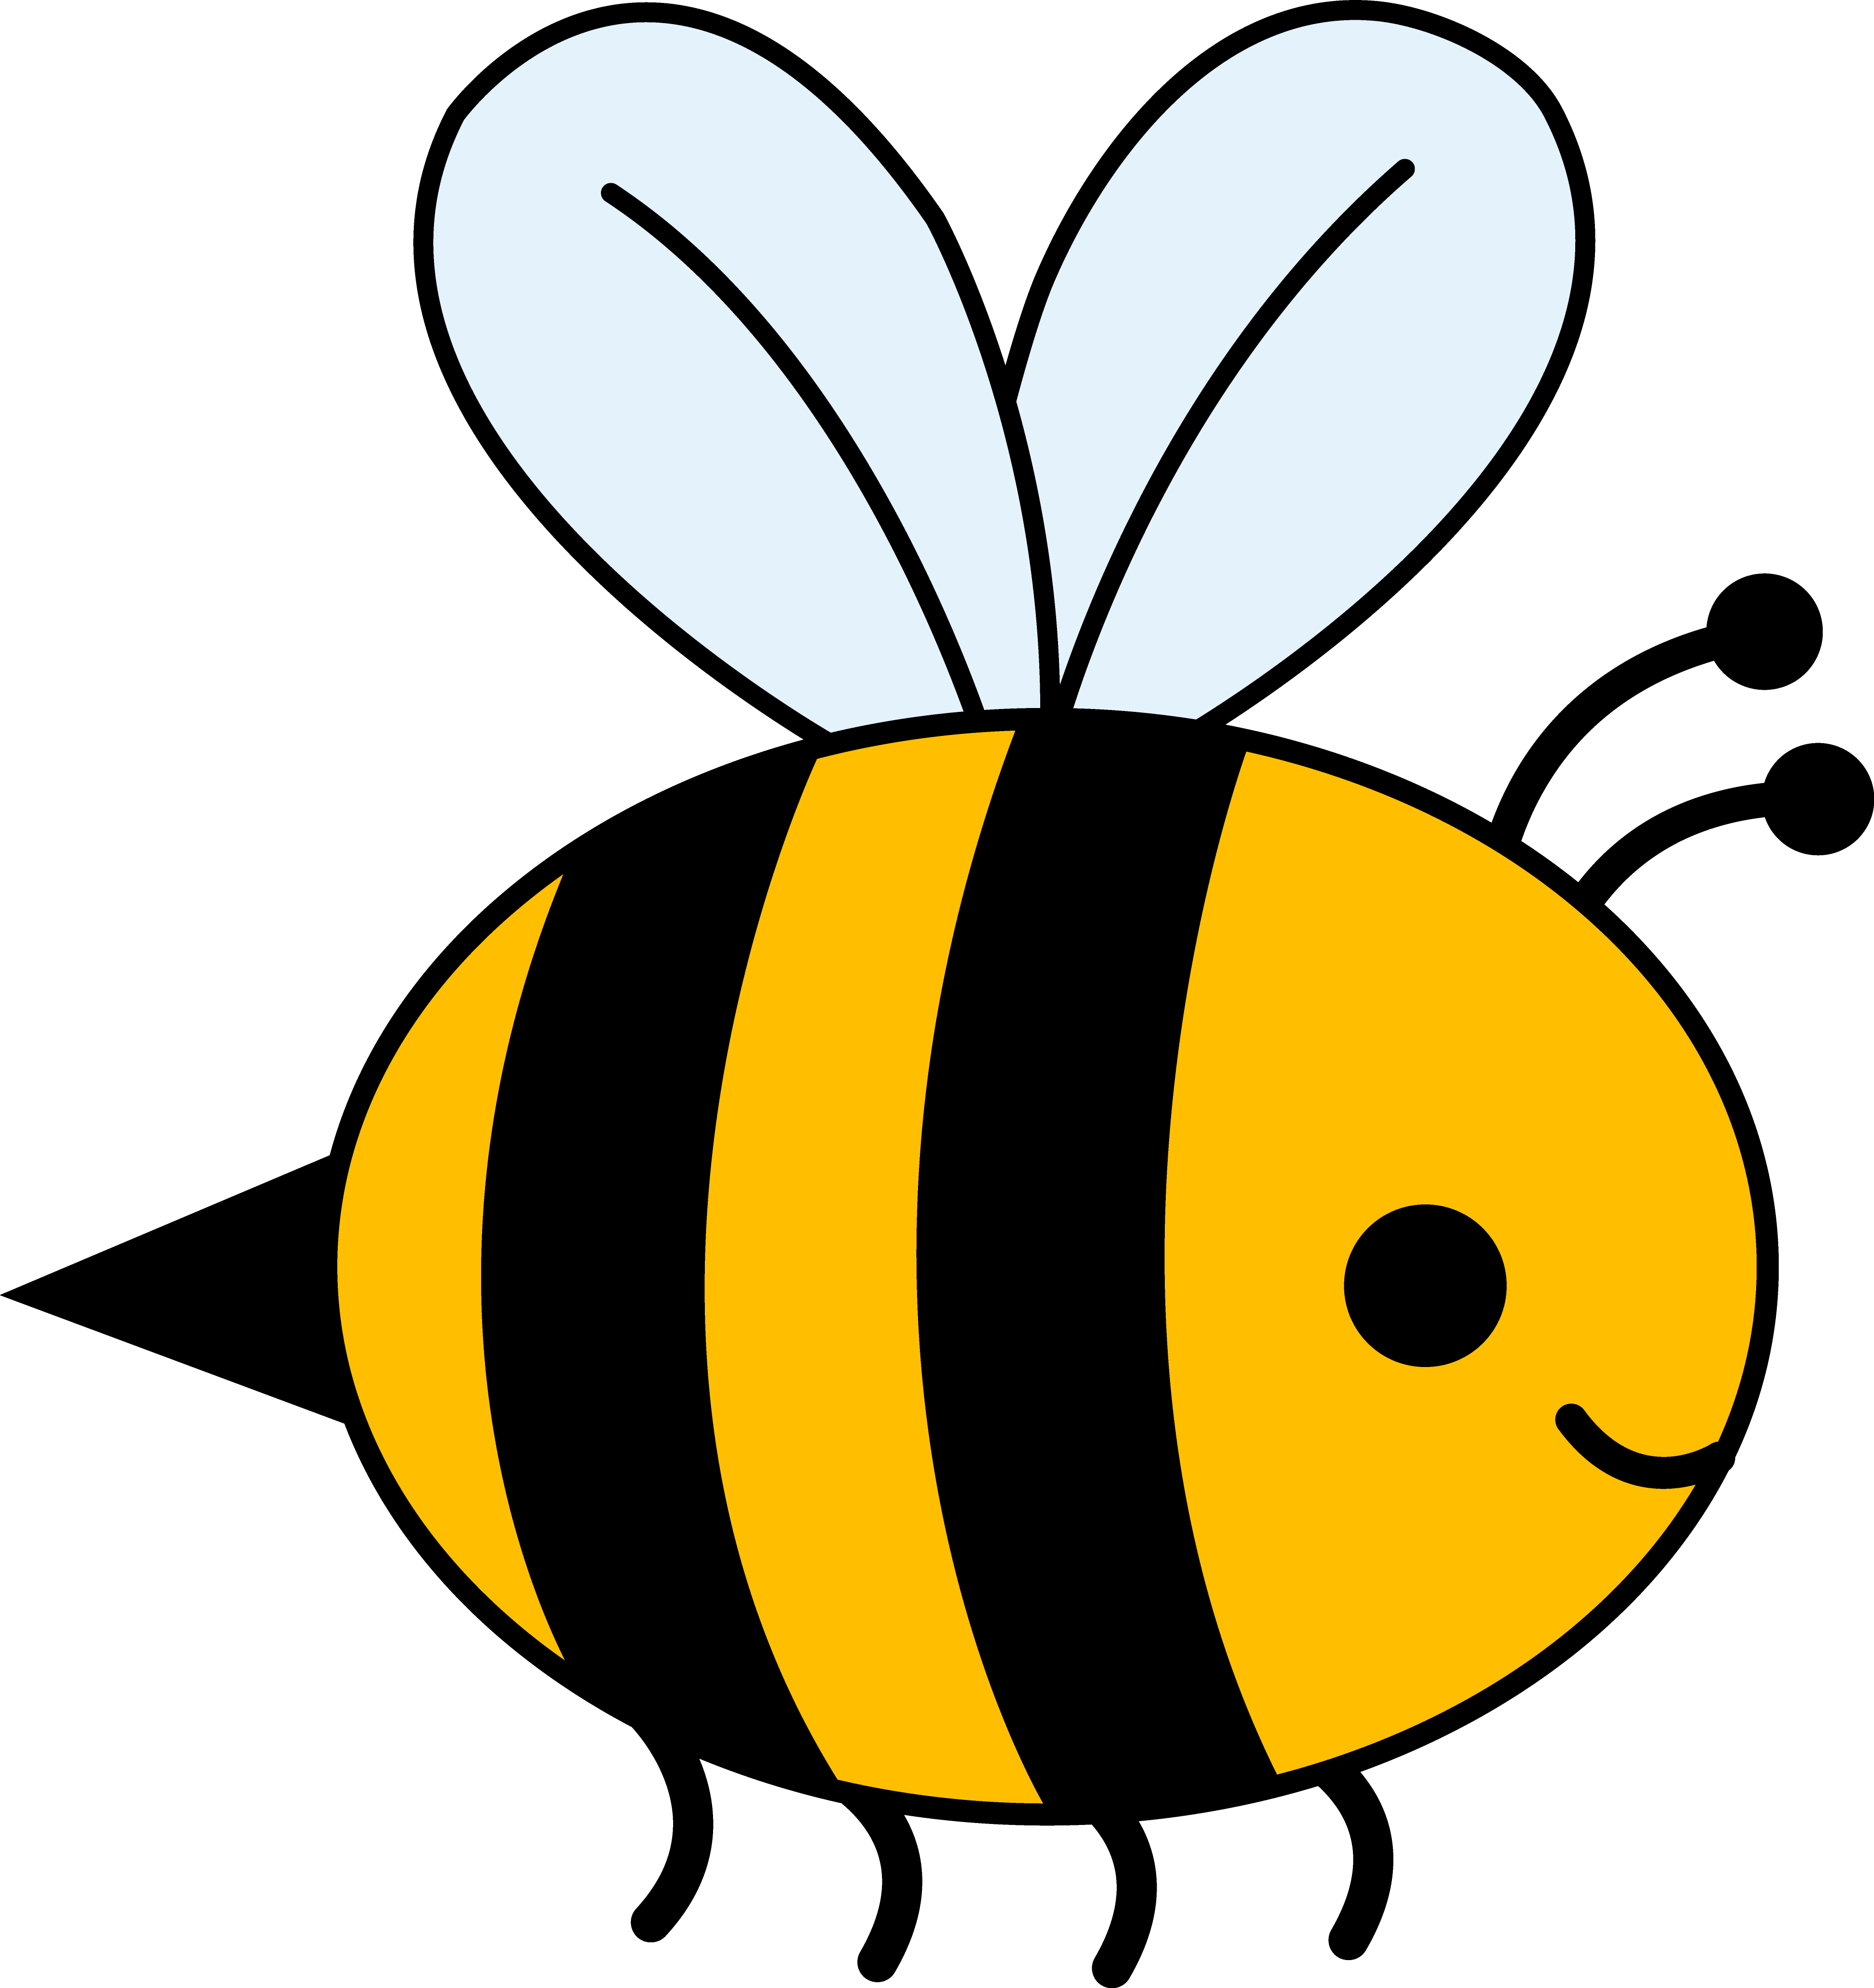 Animated Bee Clip Art - ClipArt Best